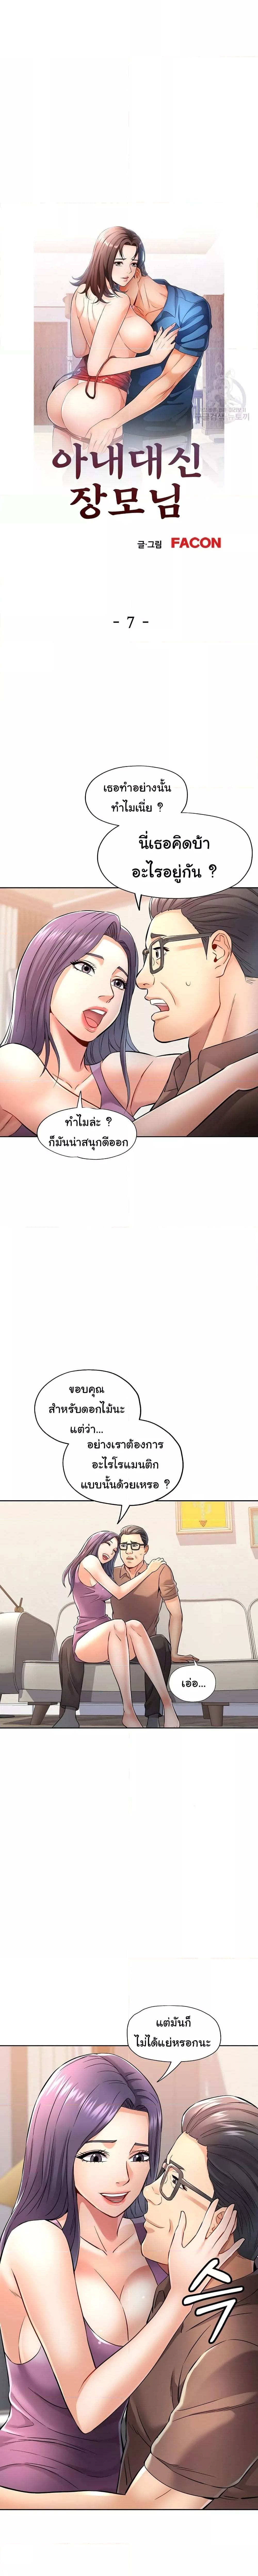 In Her Place ตอนที่ 7 ภาพ 1